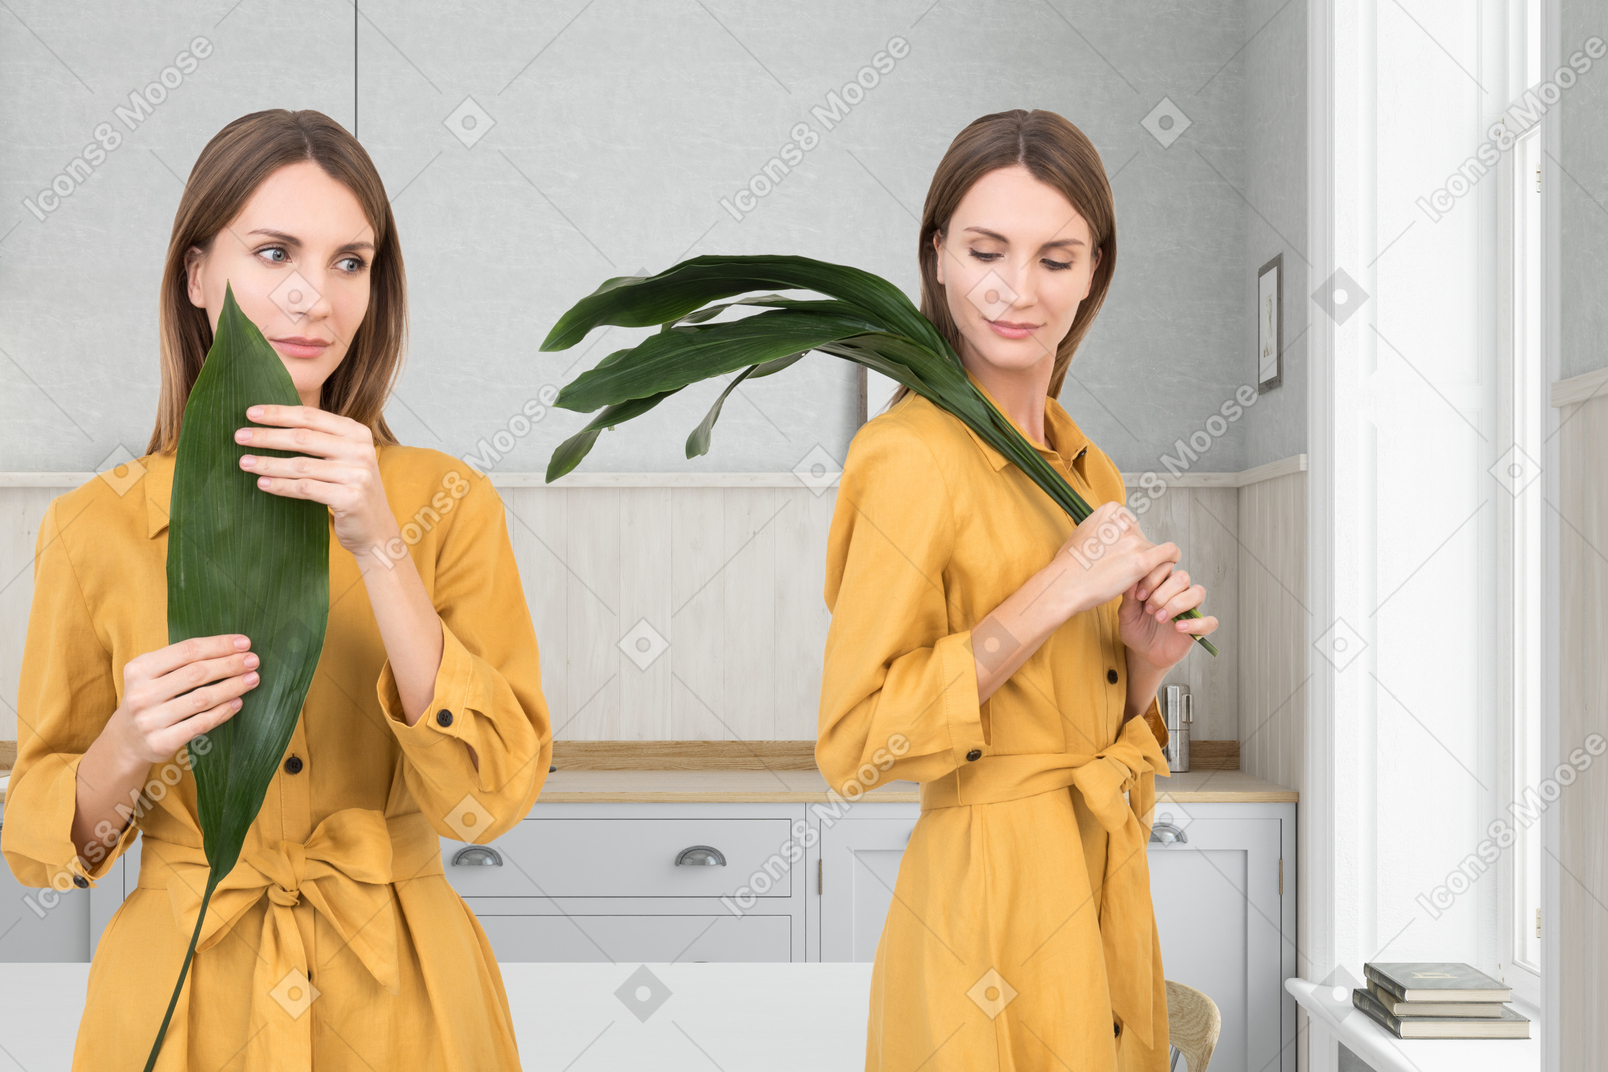 A woman in a yellow robe holding a green plant